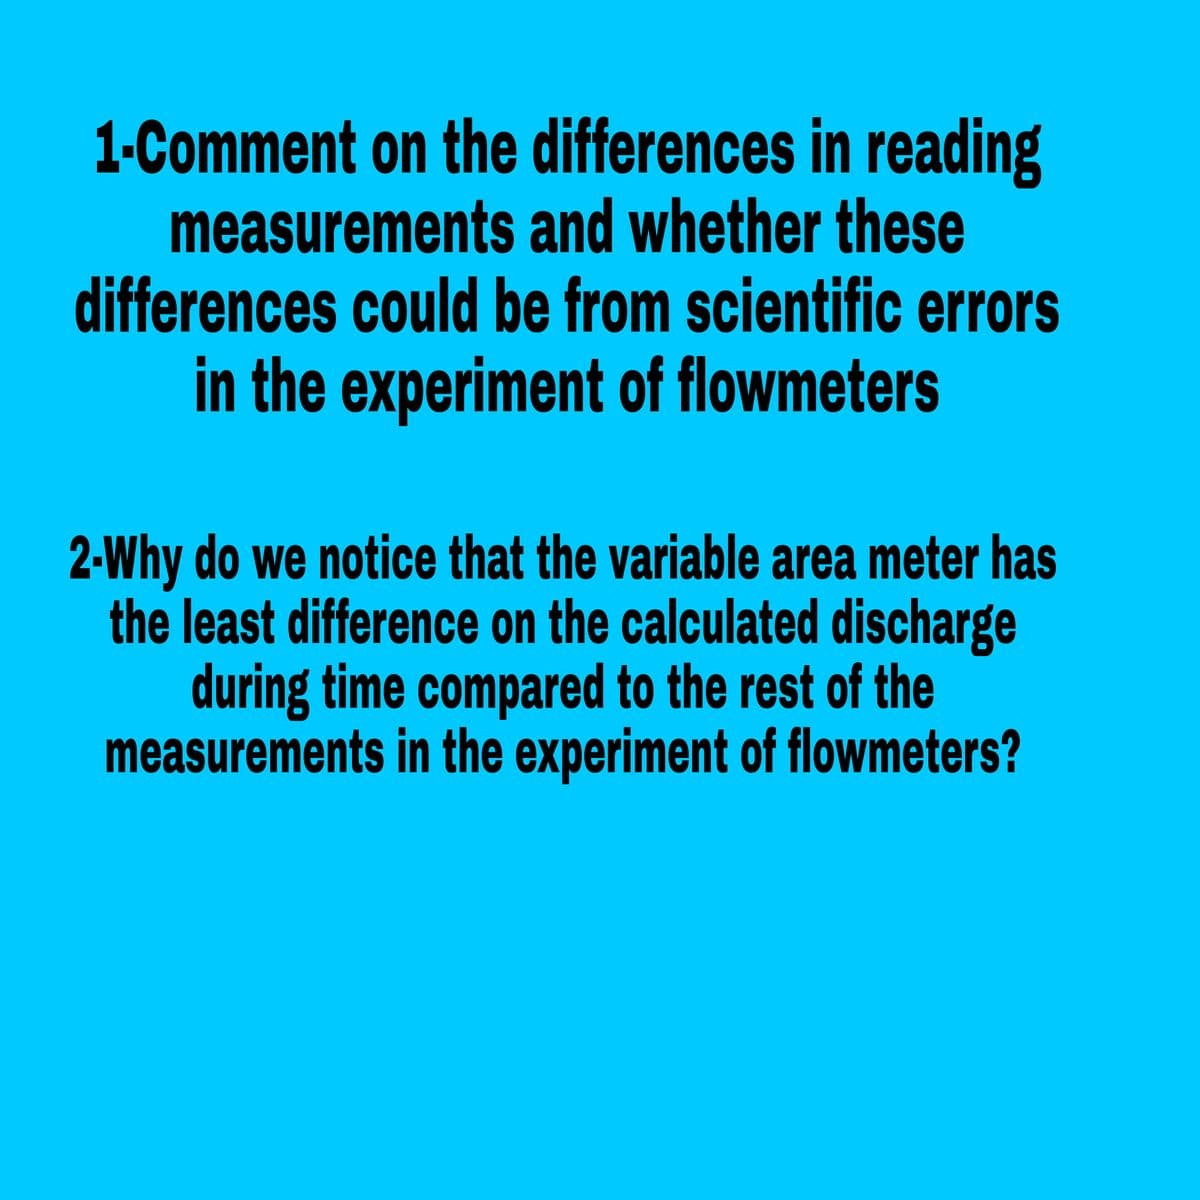 1-Comment on the differences in reading
measurements and whether these
differences could be from scientific errors
in the experiment of flowmeters
2-Why do we notice that the variable area meter has
the least difference on the calculated discharge
during time compared to the rest of the
measurements in the experiment of flowmeters?
